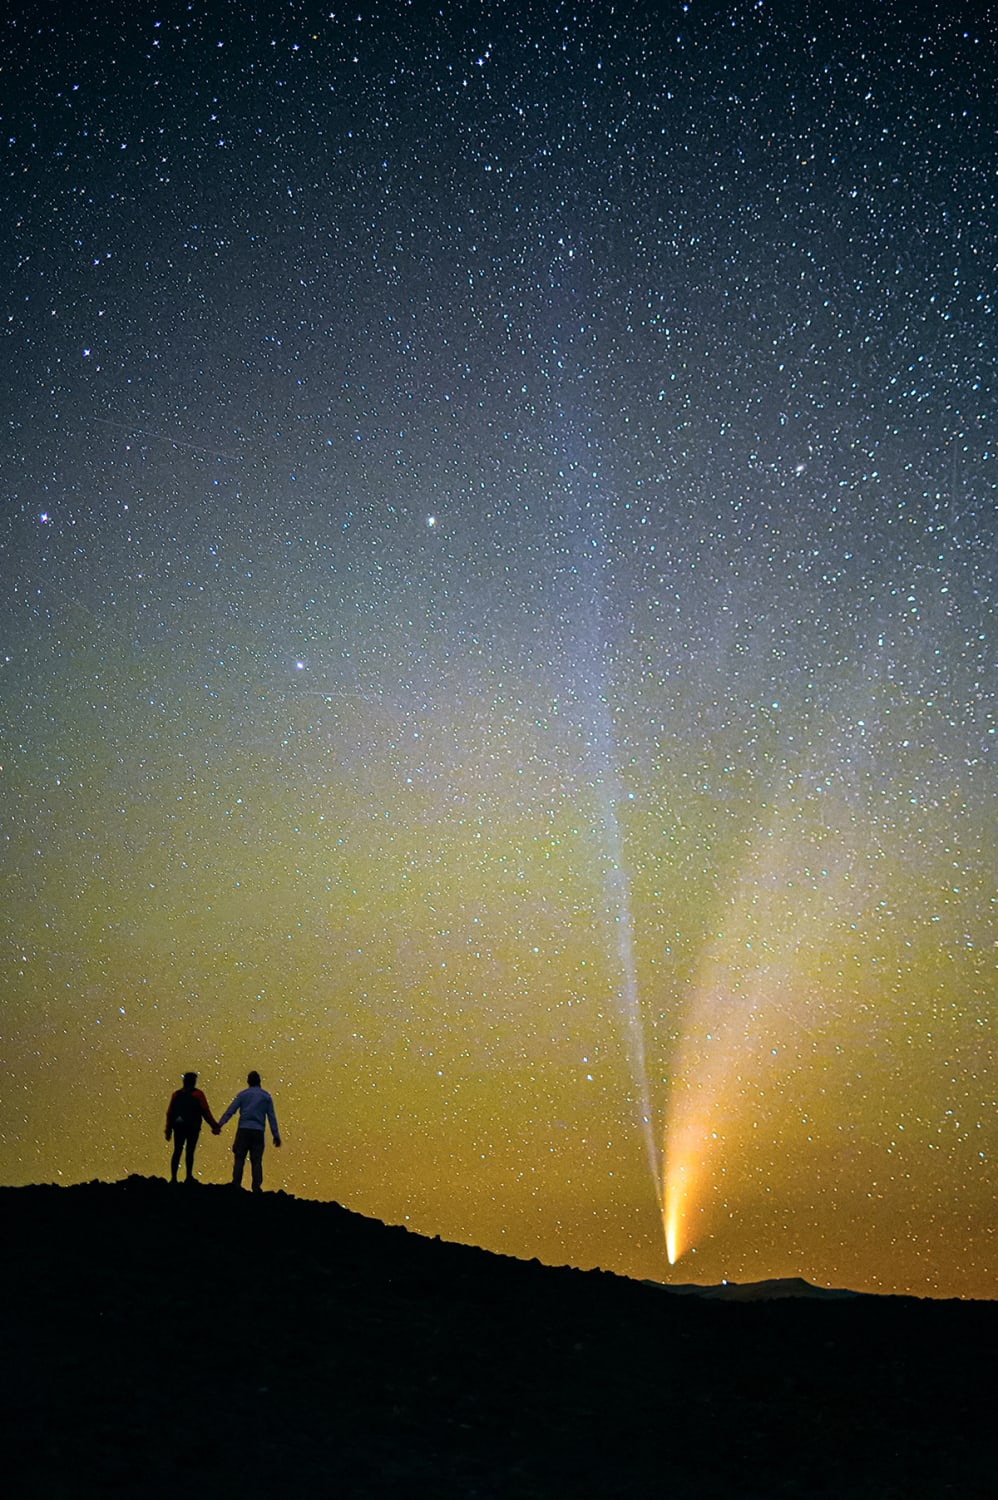 Hiked for miles at Craters of the Moon National Monument to capture Comet NEOWISE under dark skies